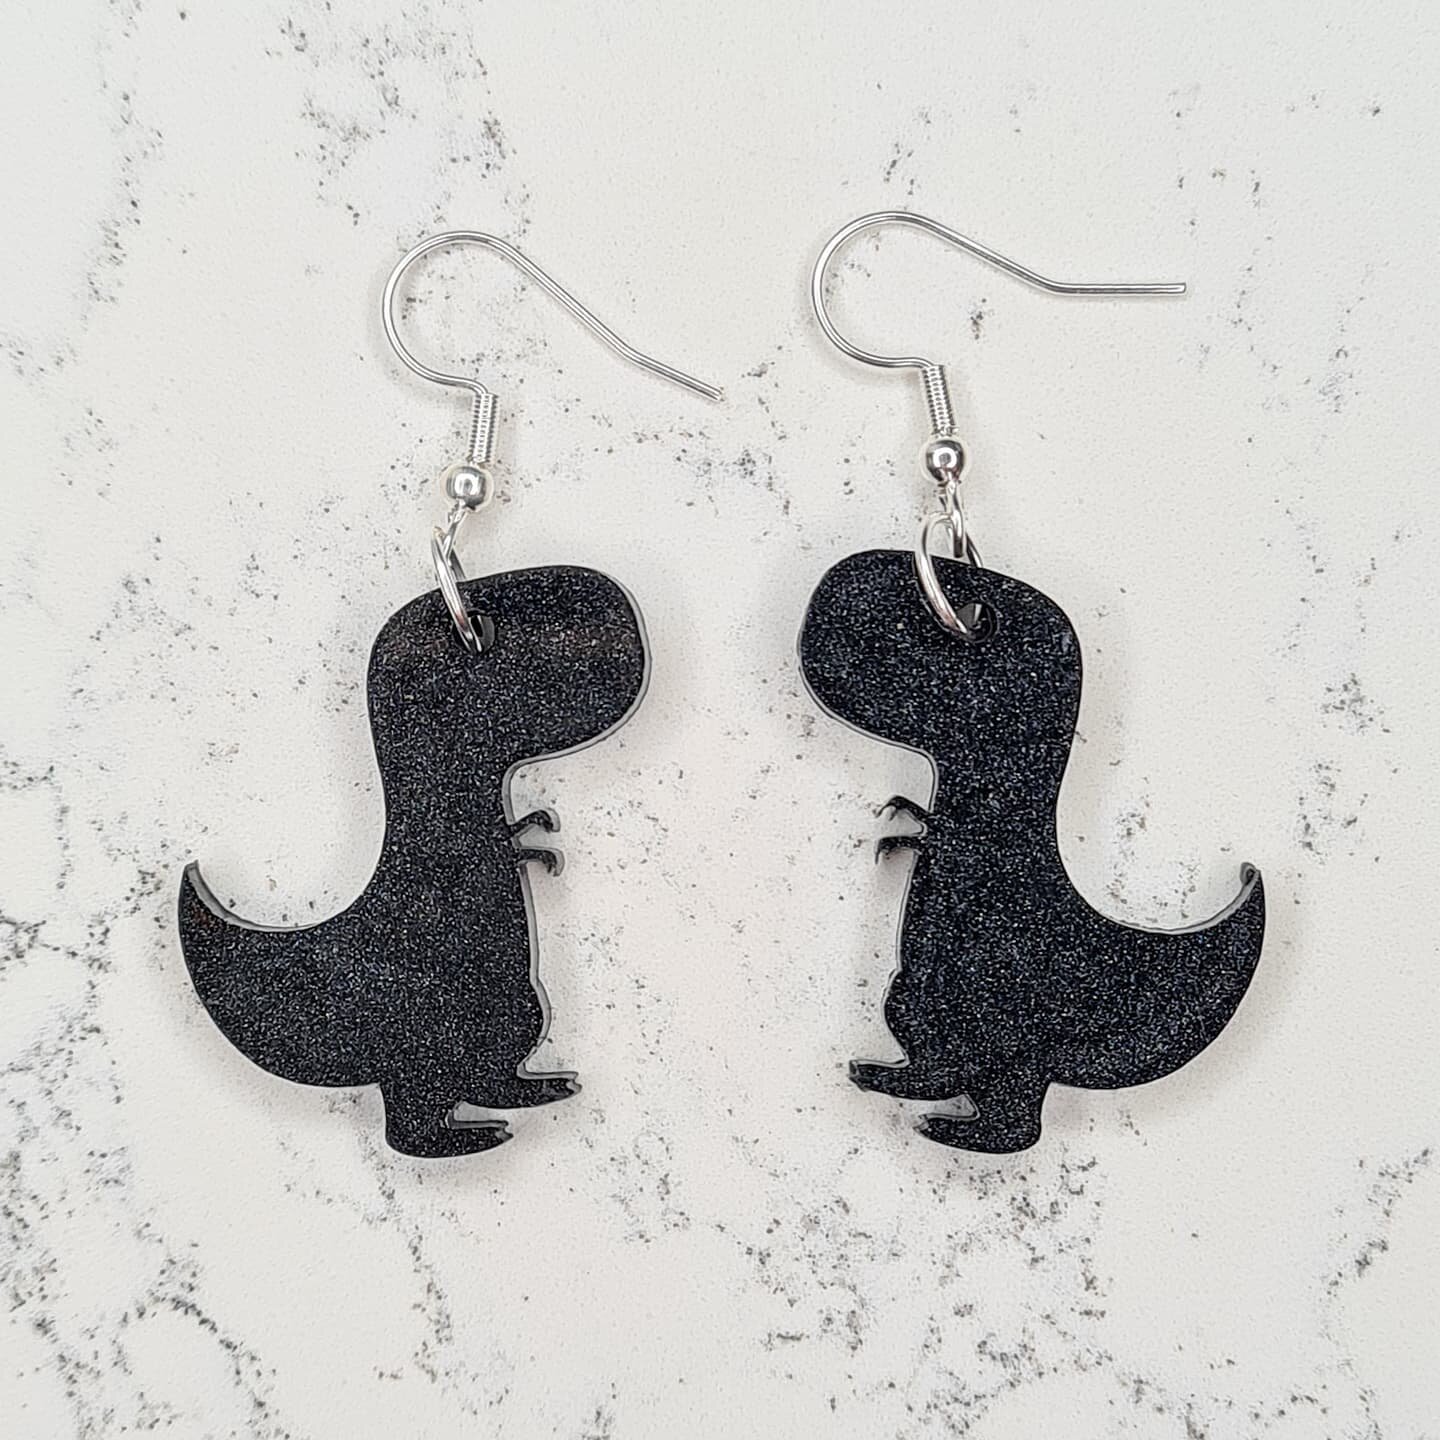 Black shimmer with sterling silver hooks available now 

https://www.amityalice.com/amity-alice-designs-jewellery-shop/aaz0ql2b26y4rmto28rob157xgx60a